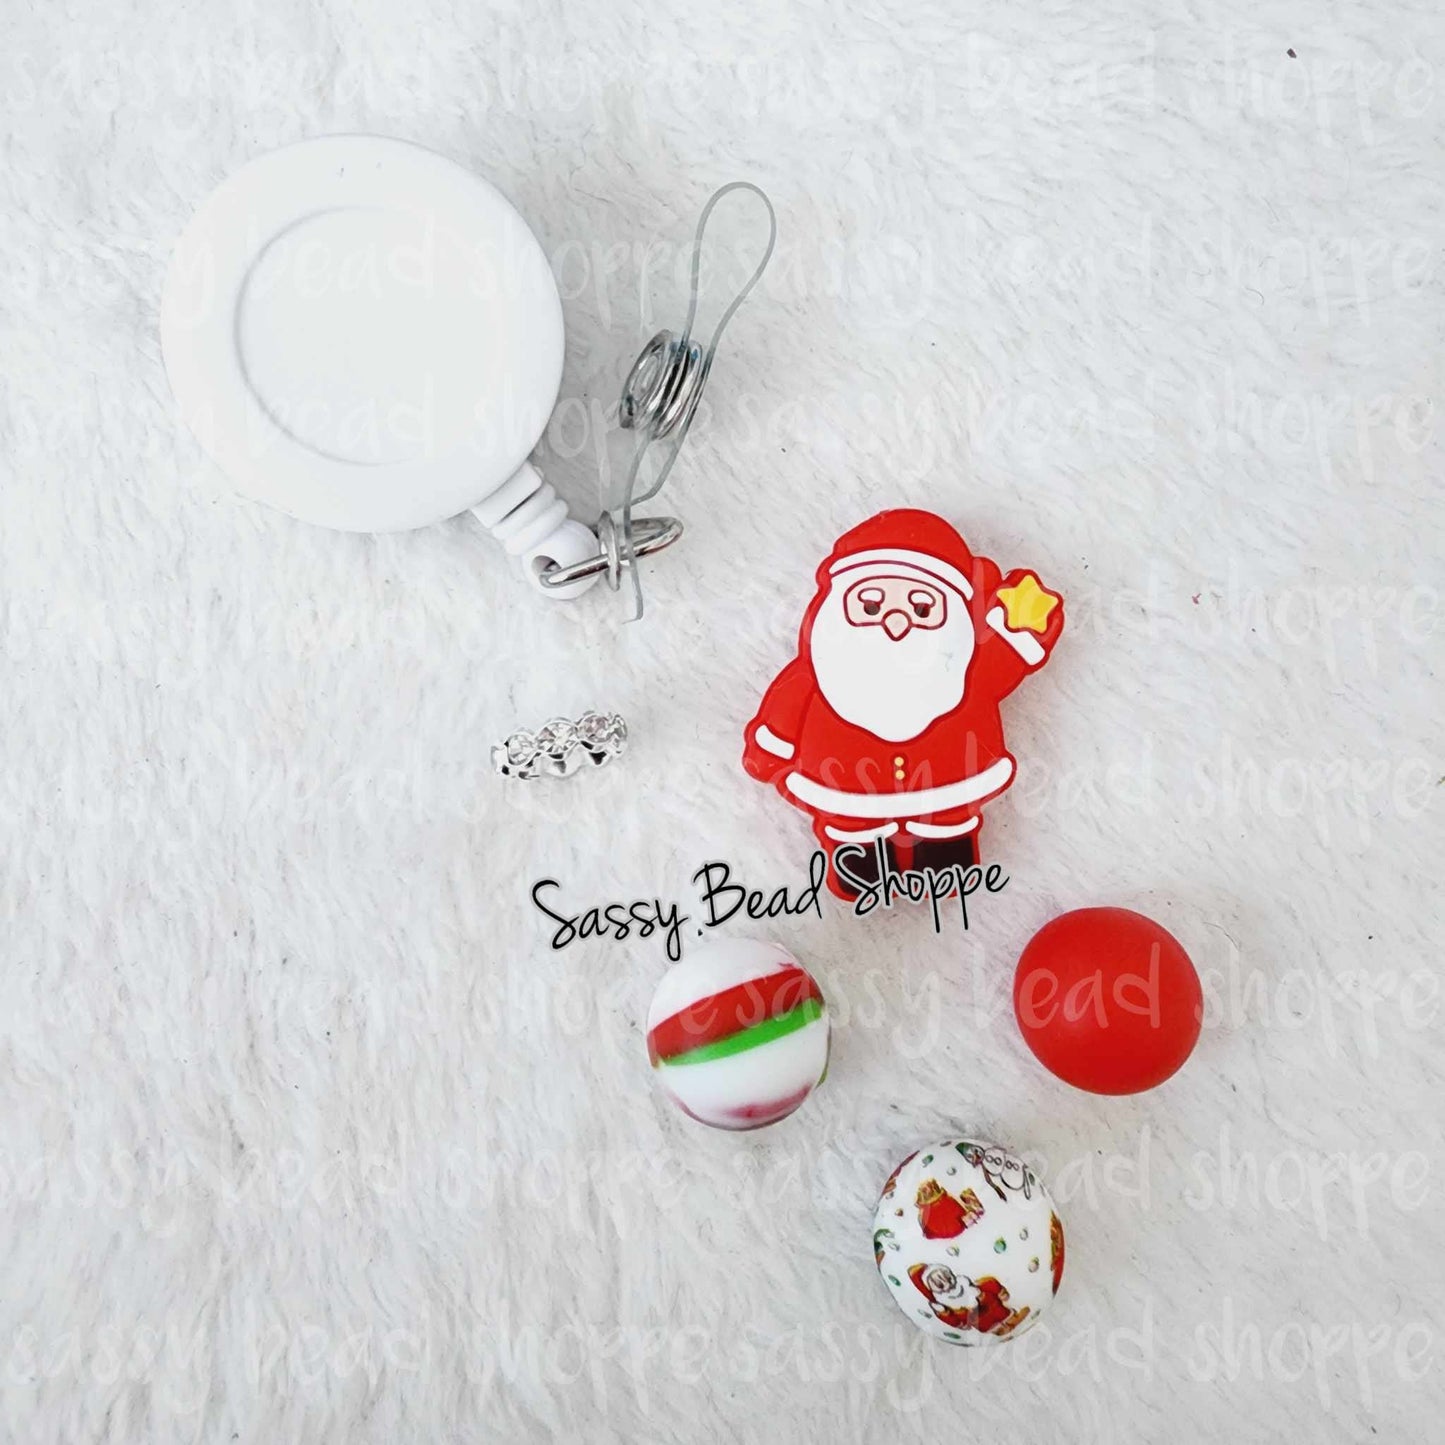 Sassy Bead Shoppe Winter Magic Badge Reel What you will receive in your kit